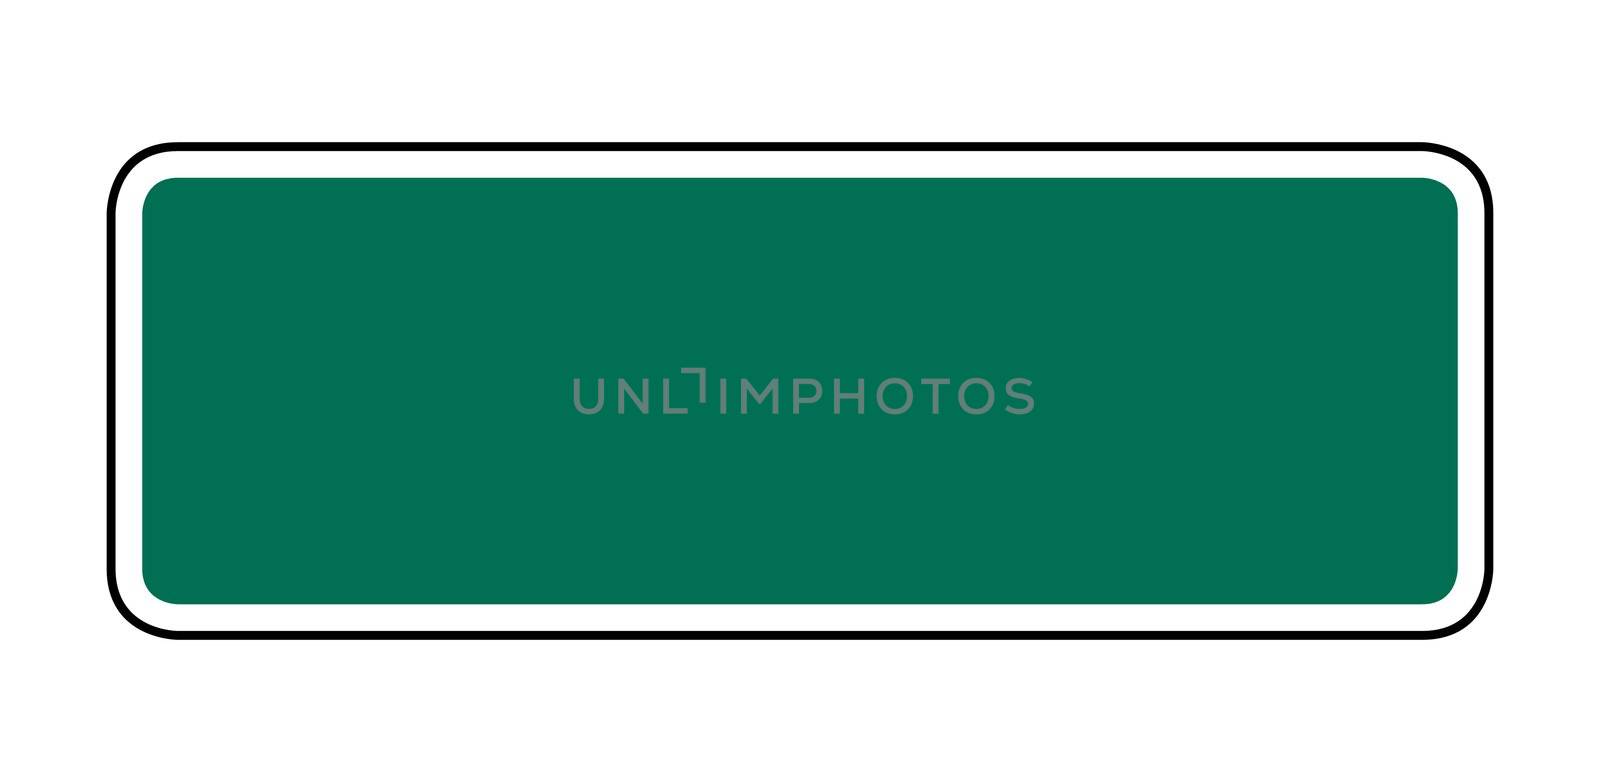 Blank green American style street or road sign with copy space; isolated on white background.